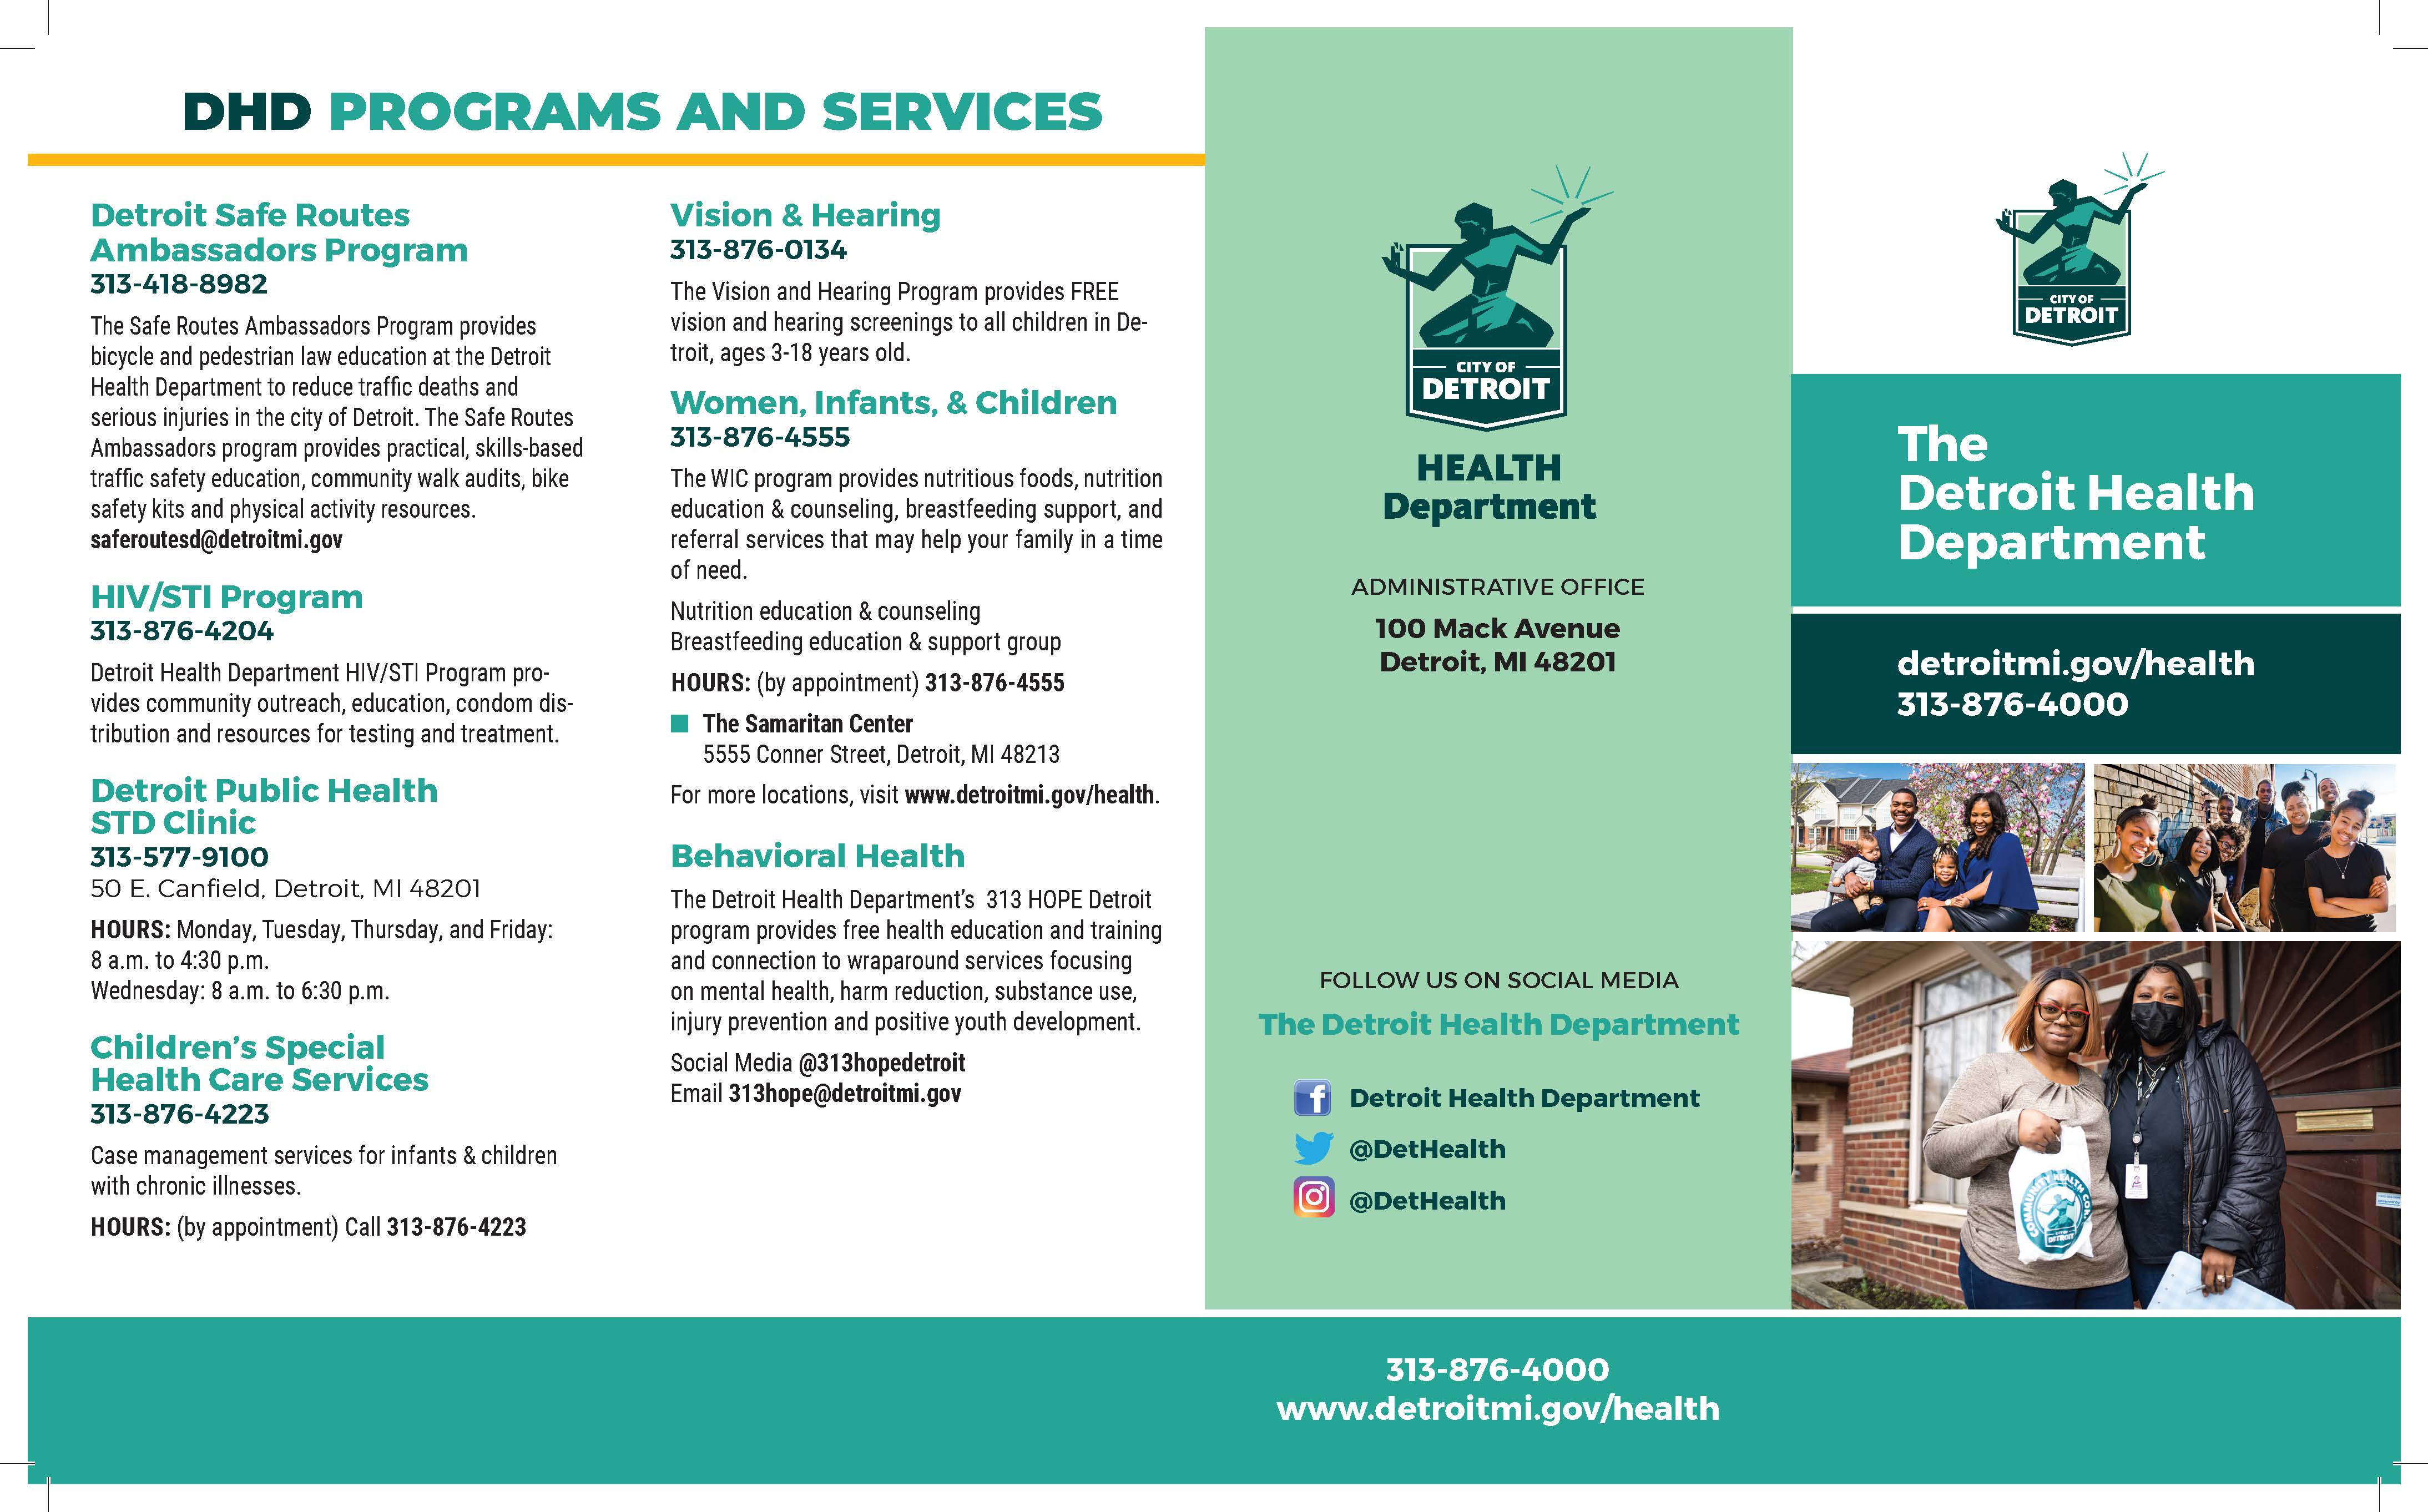 Back of brochure, continuation of programs and services plus contact info